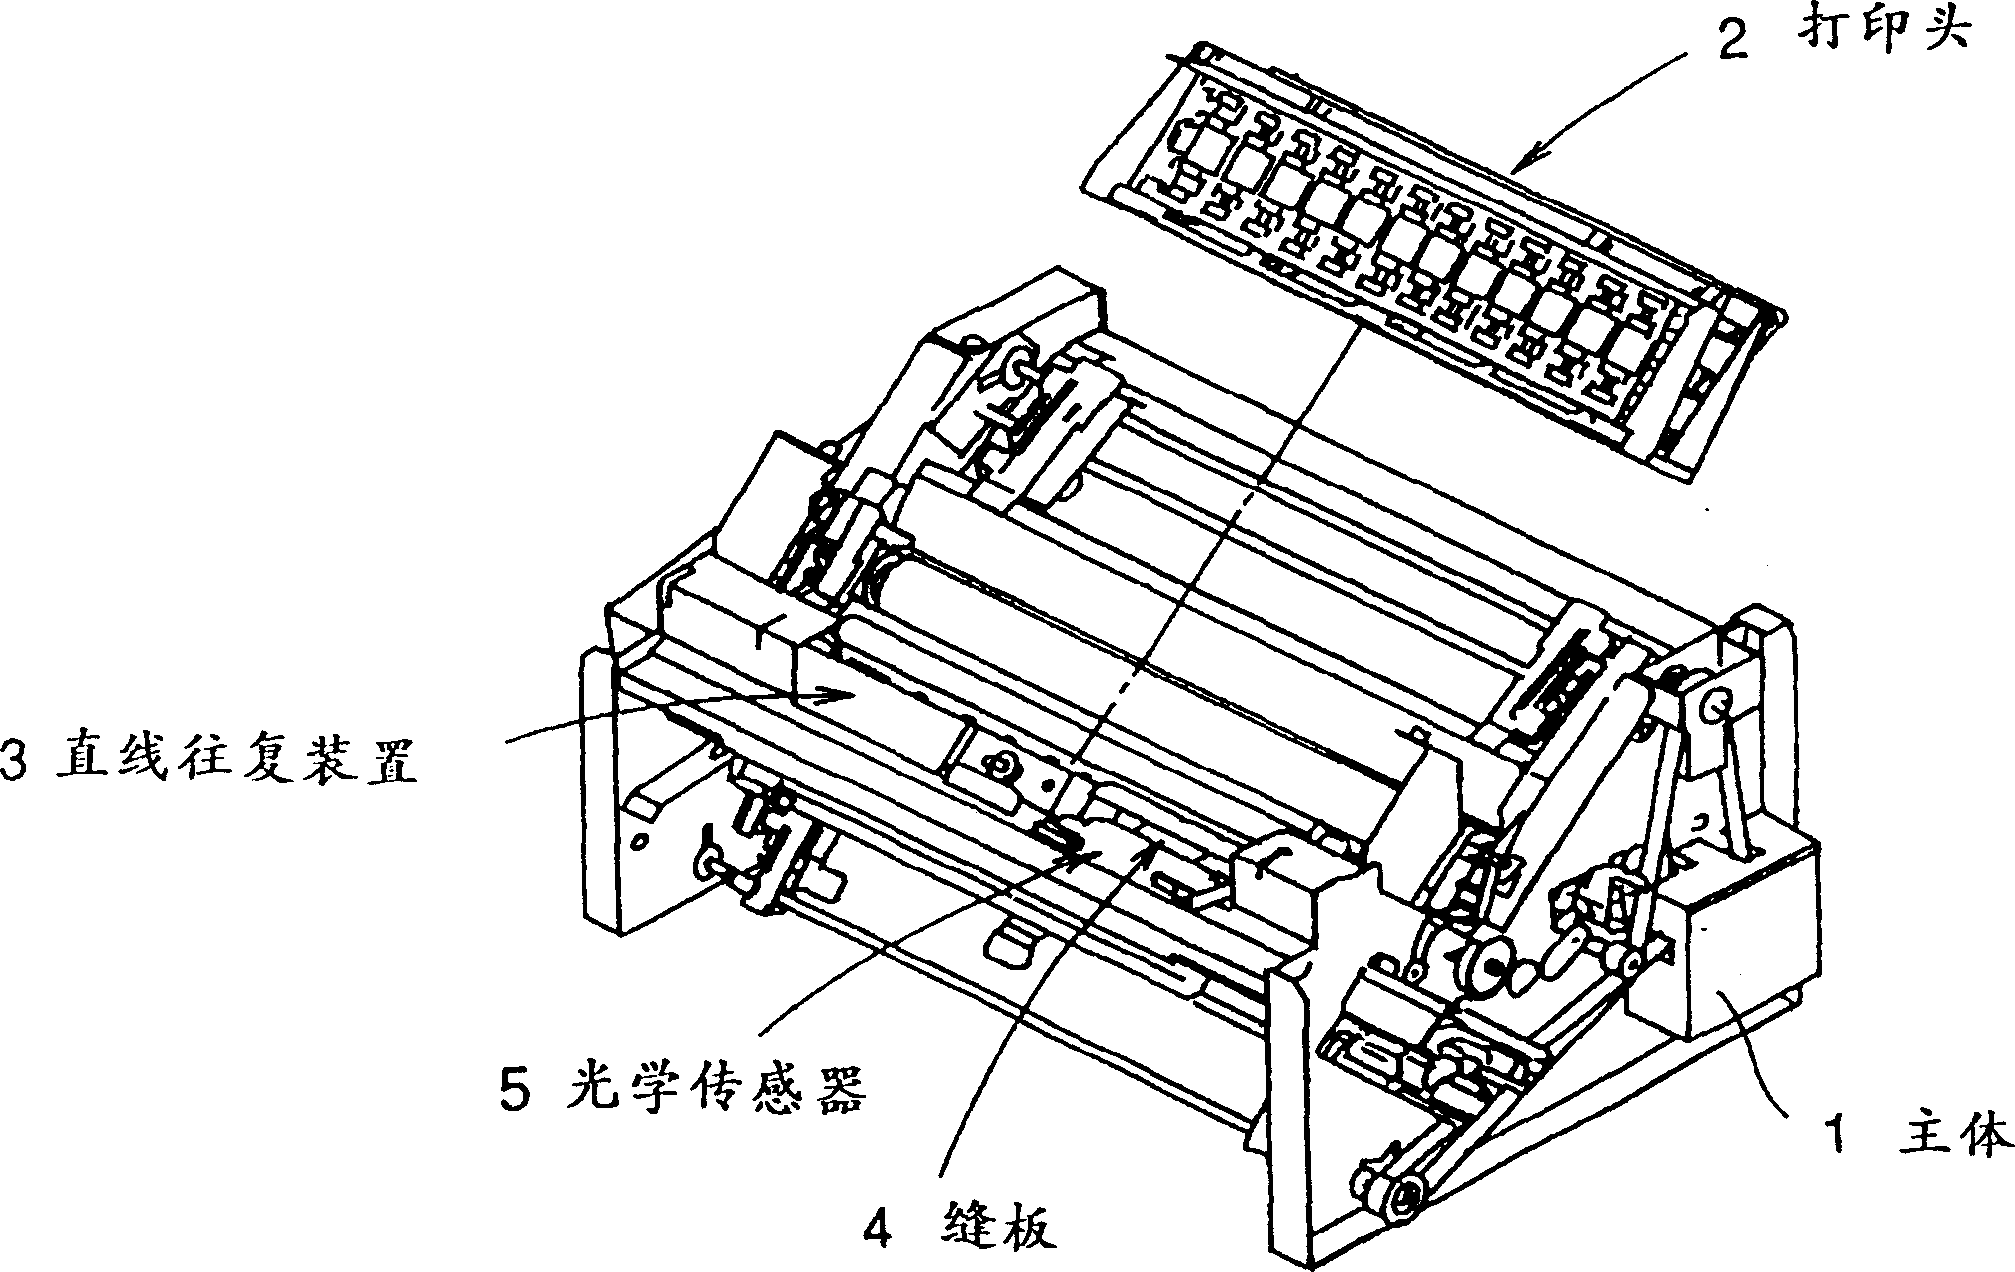 Printing point offset correction control method and printing device thereof